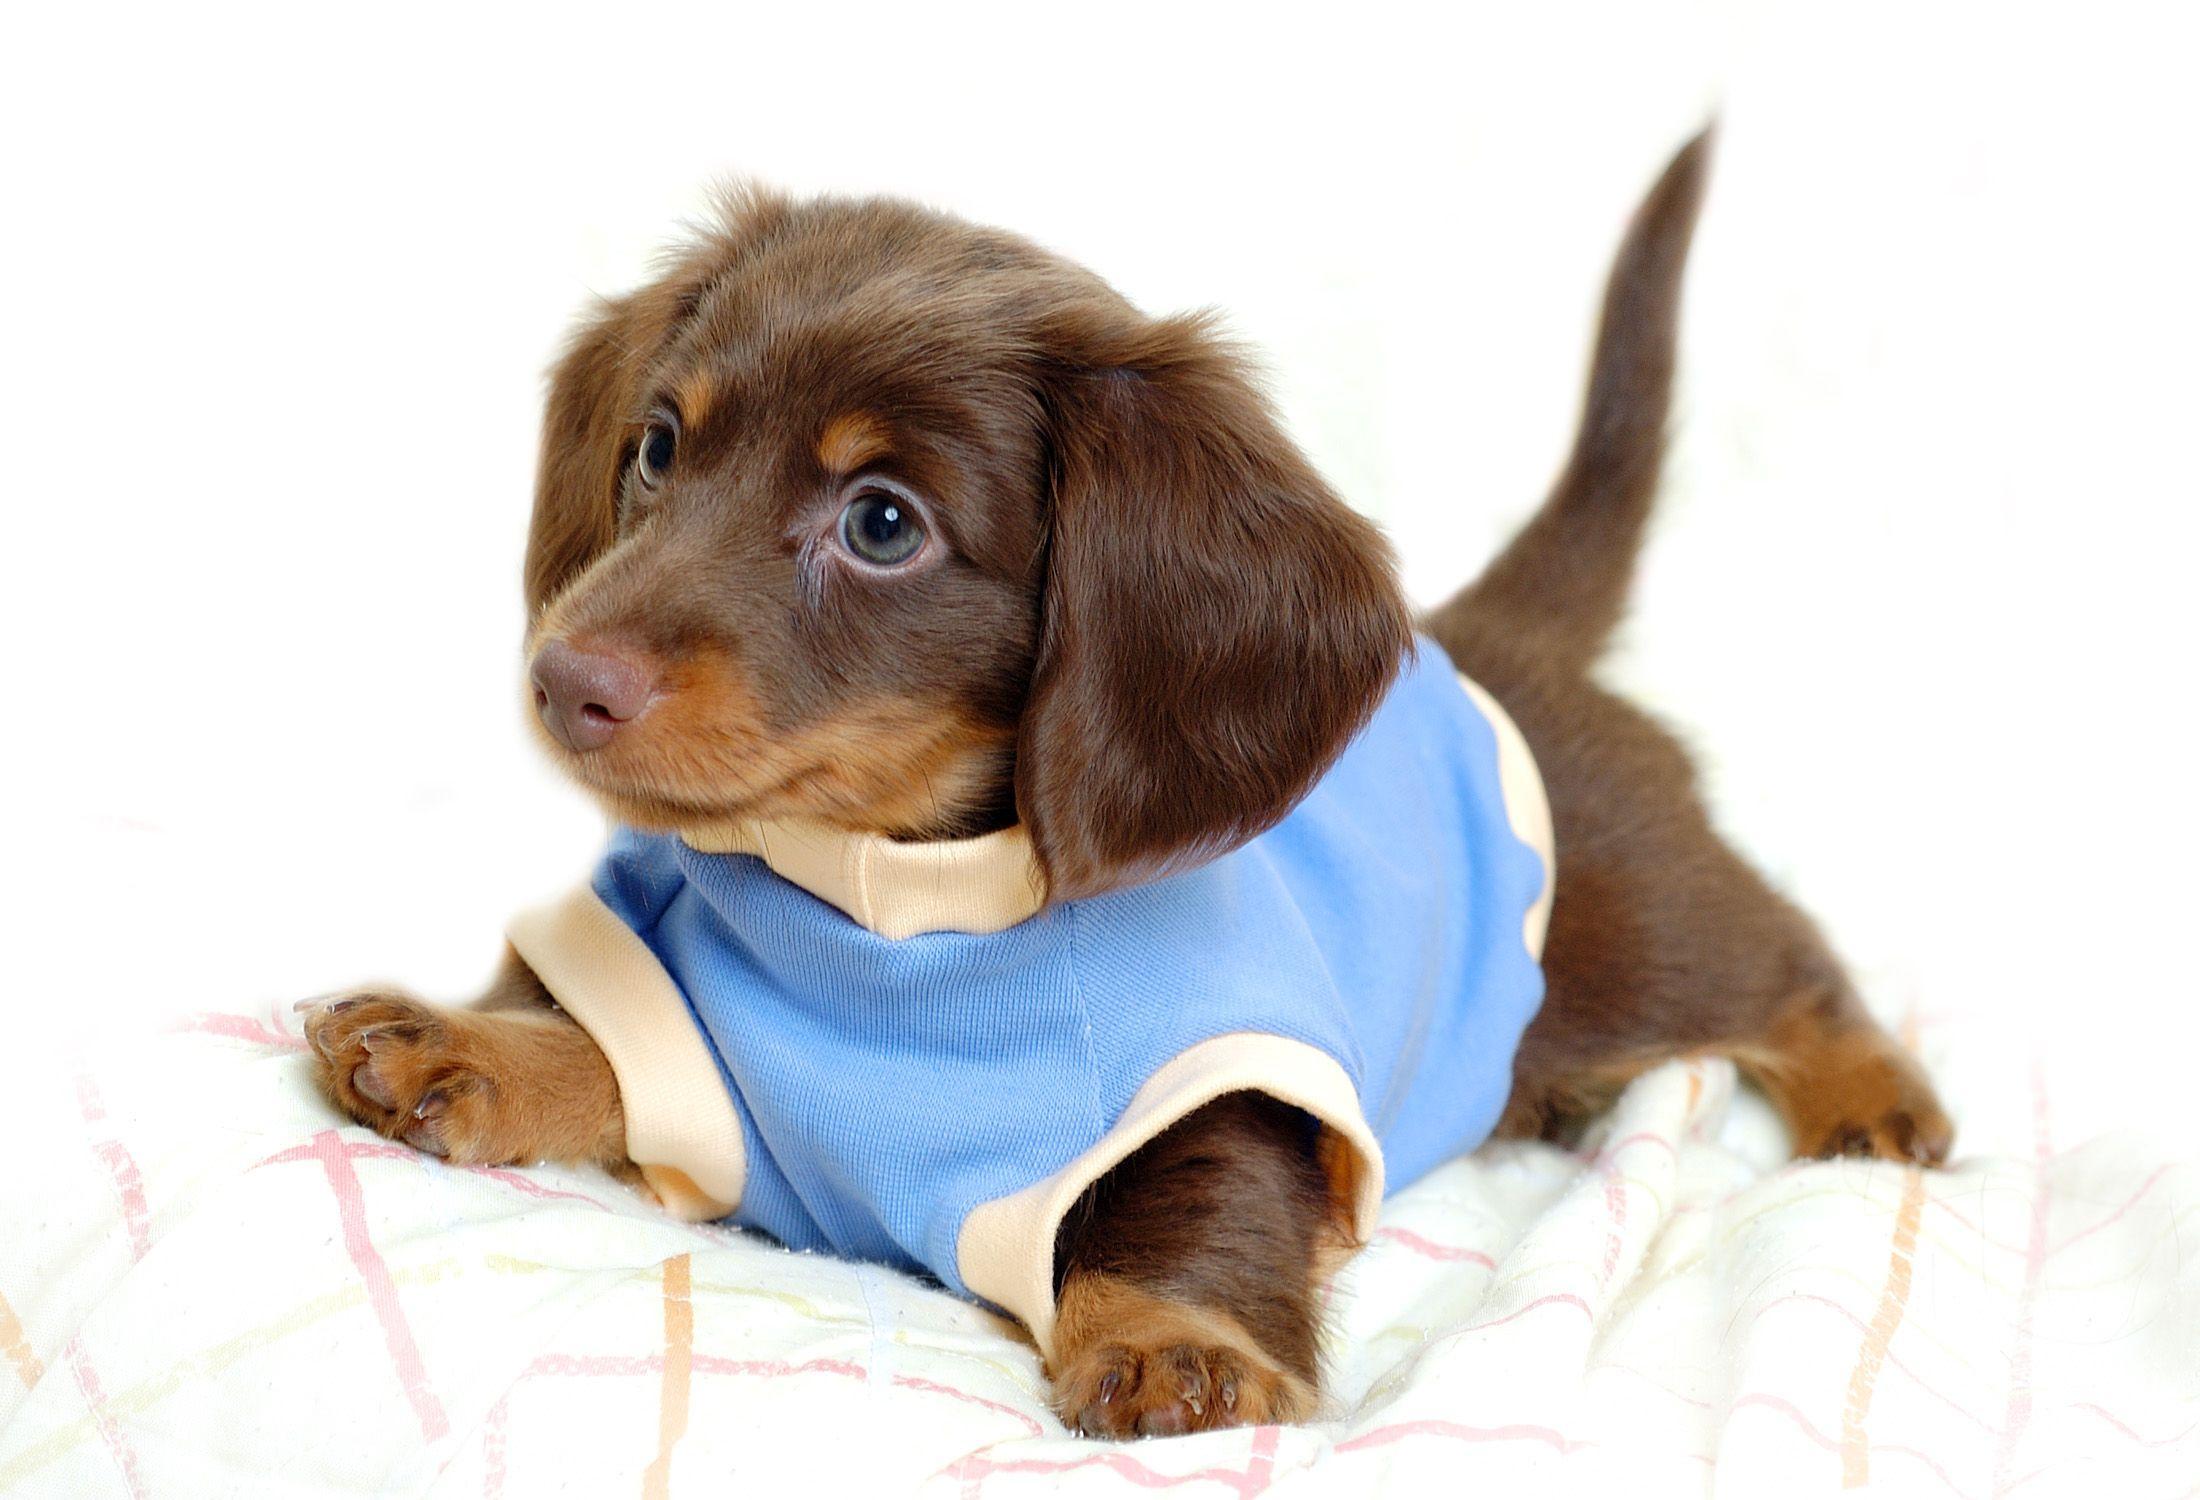 Dachshund HD Wallpaper and Background Image